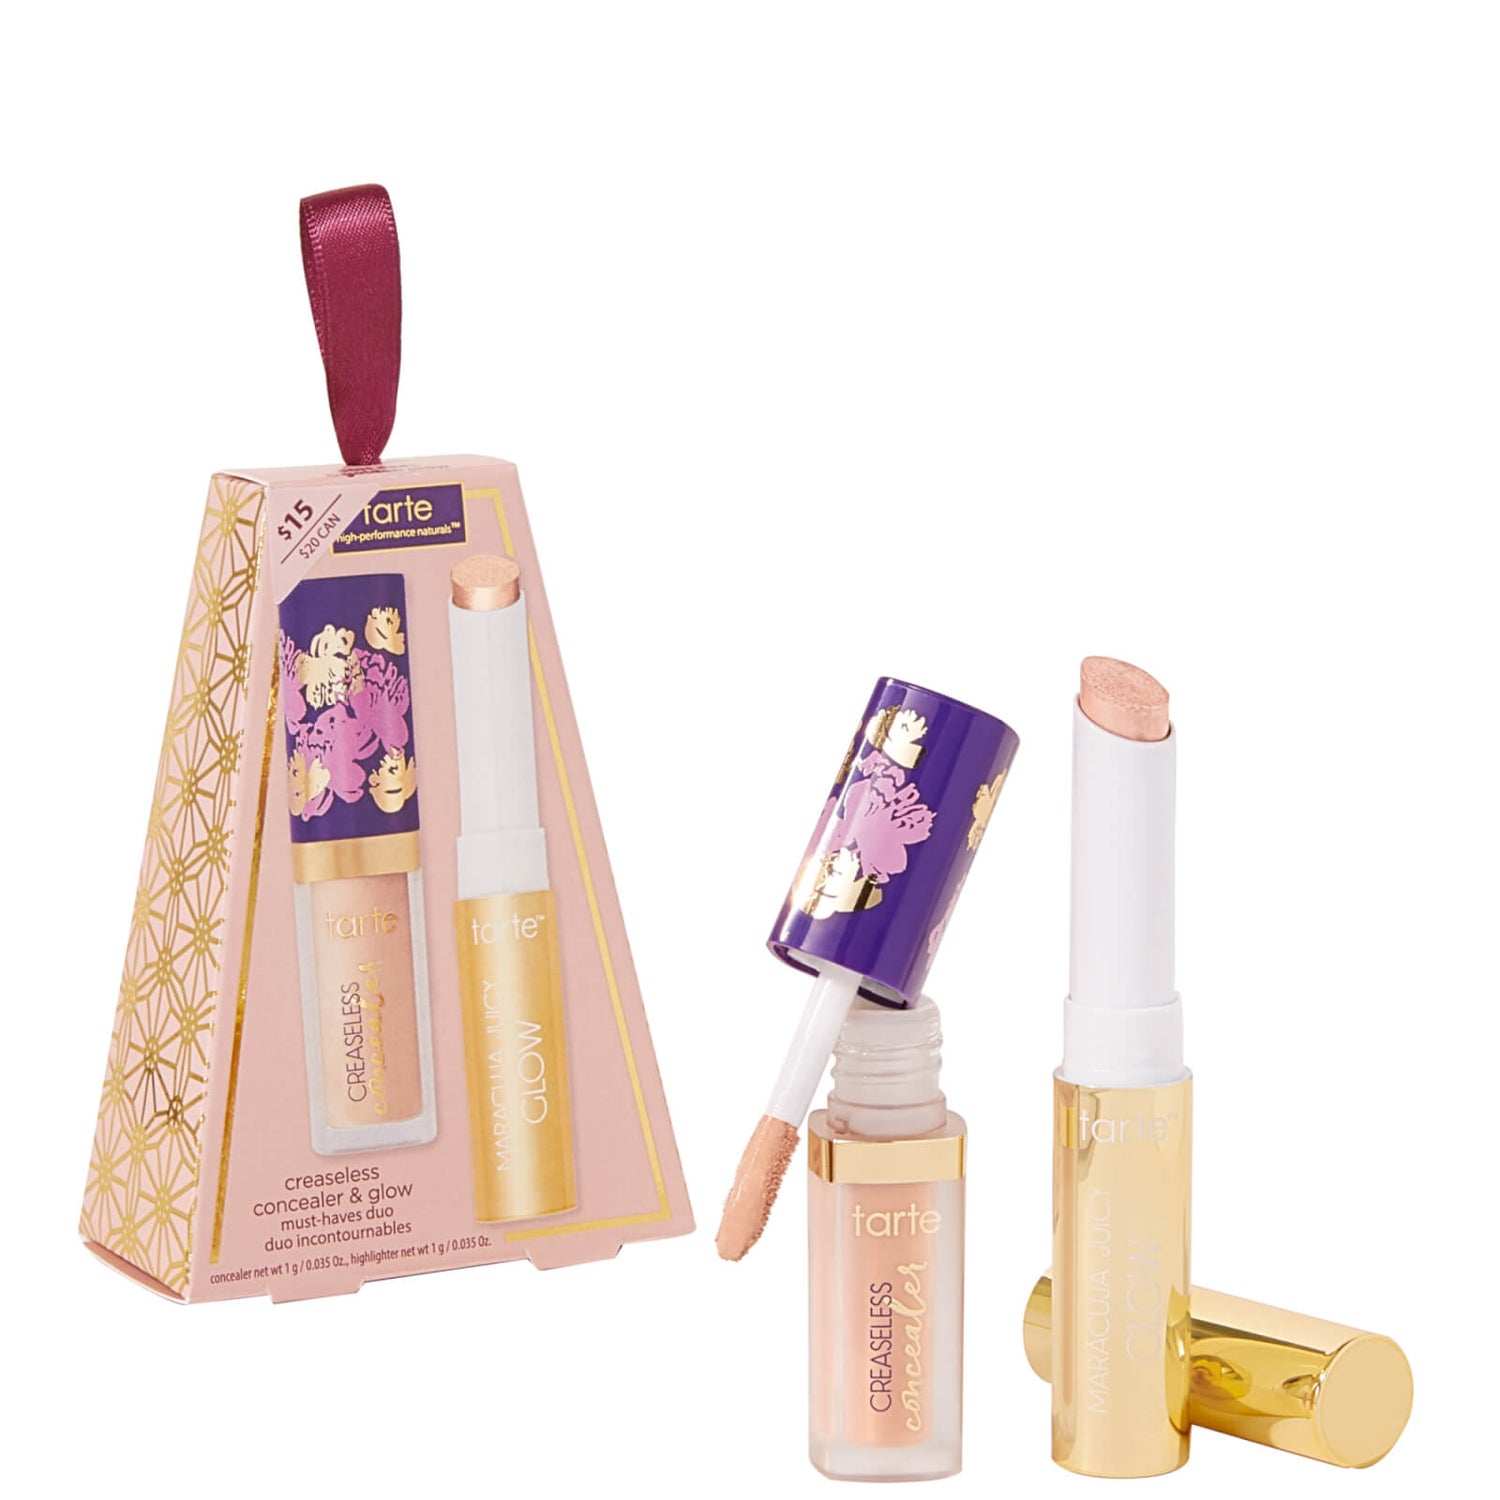 Tarte Creaseless Concealer and Glow Must-Haves Duo - Light (Worth $26.00)